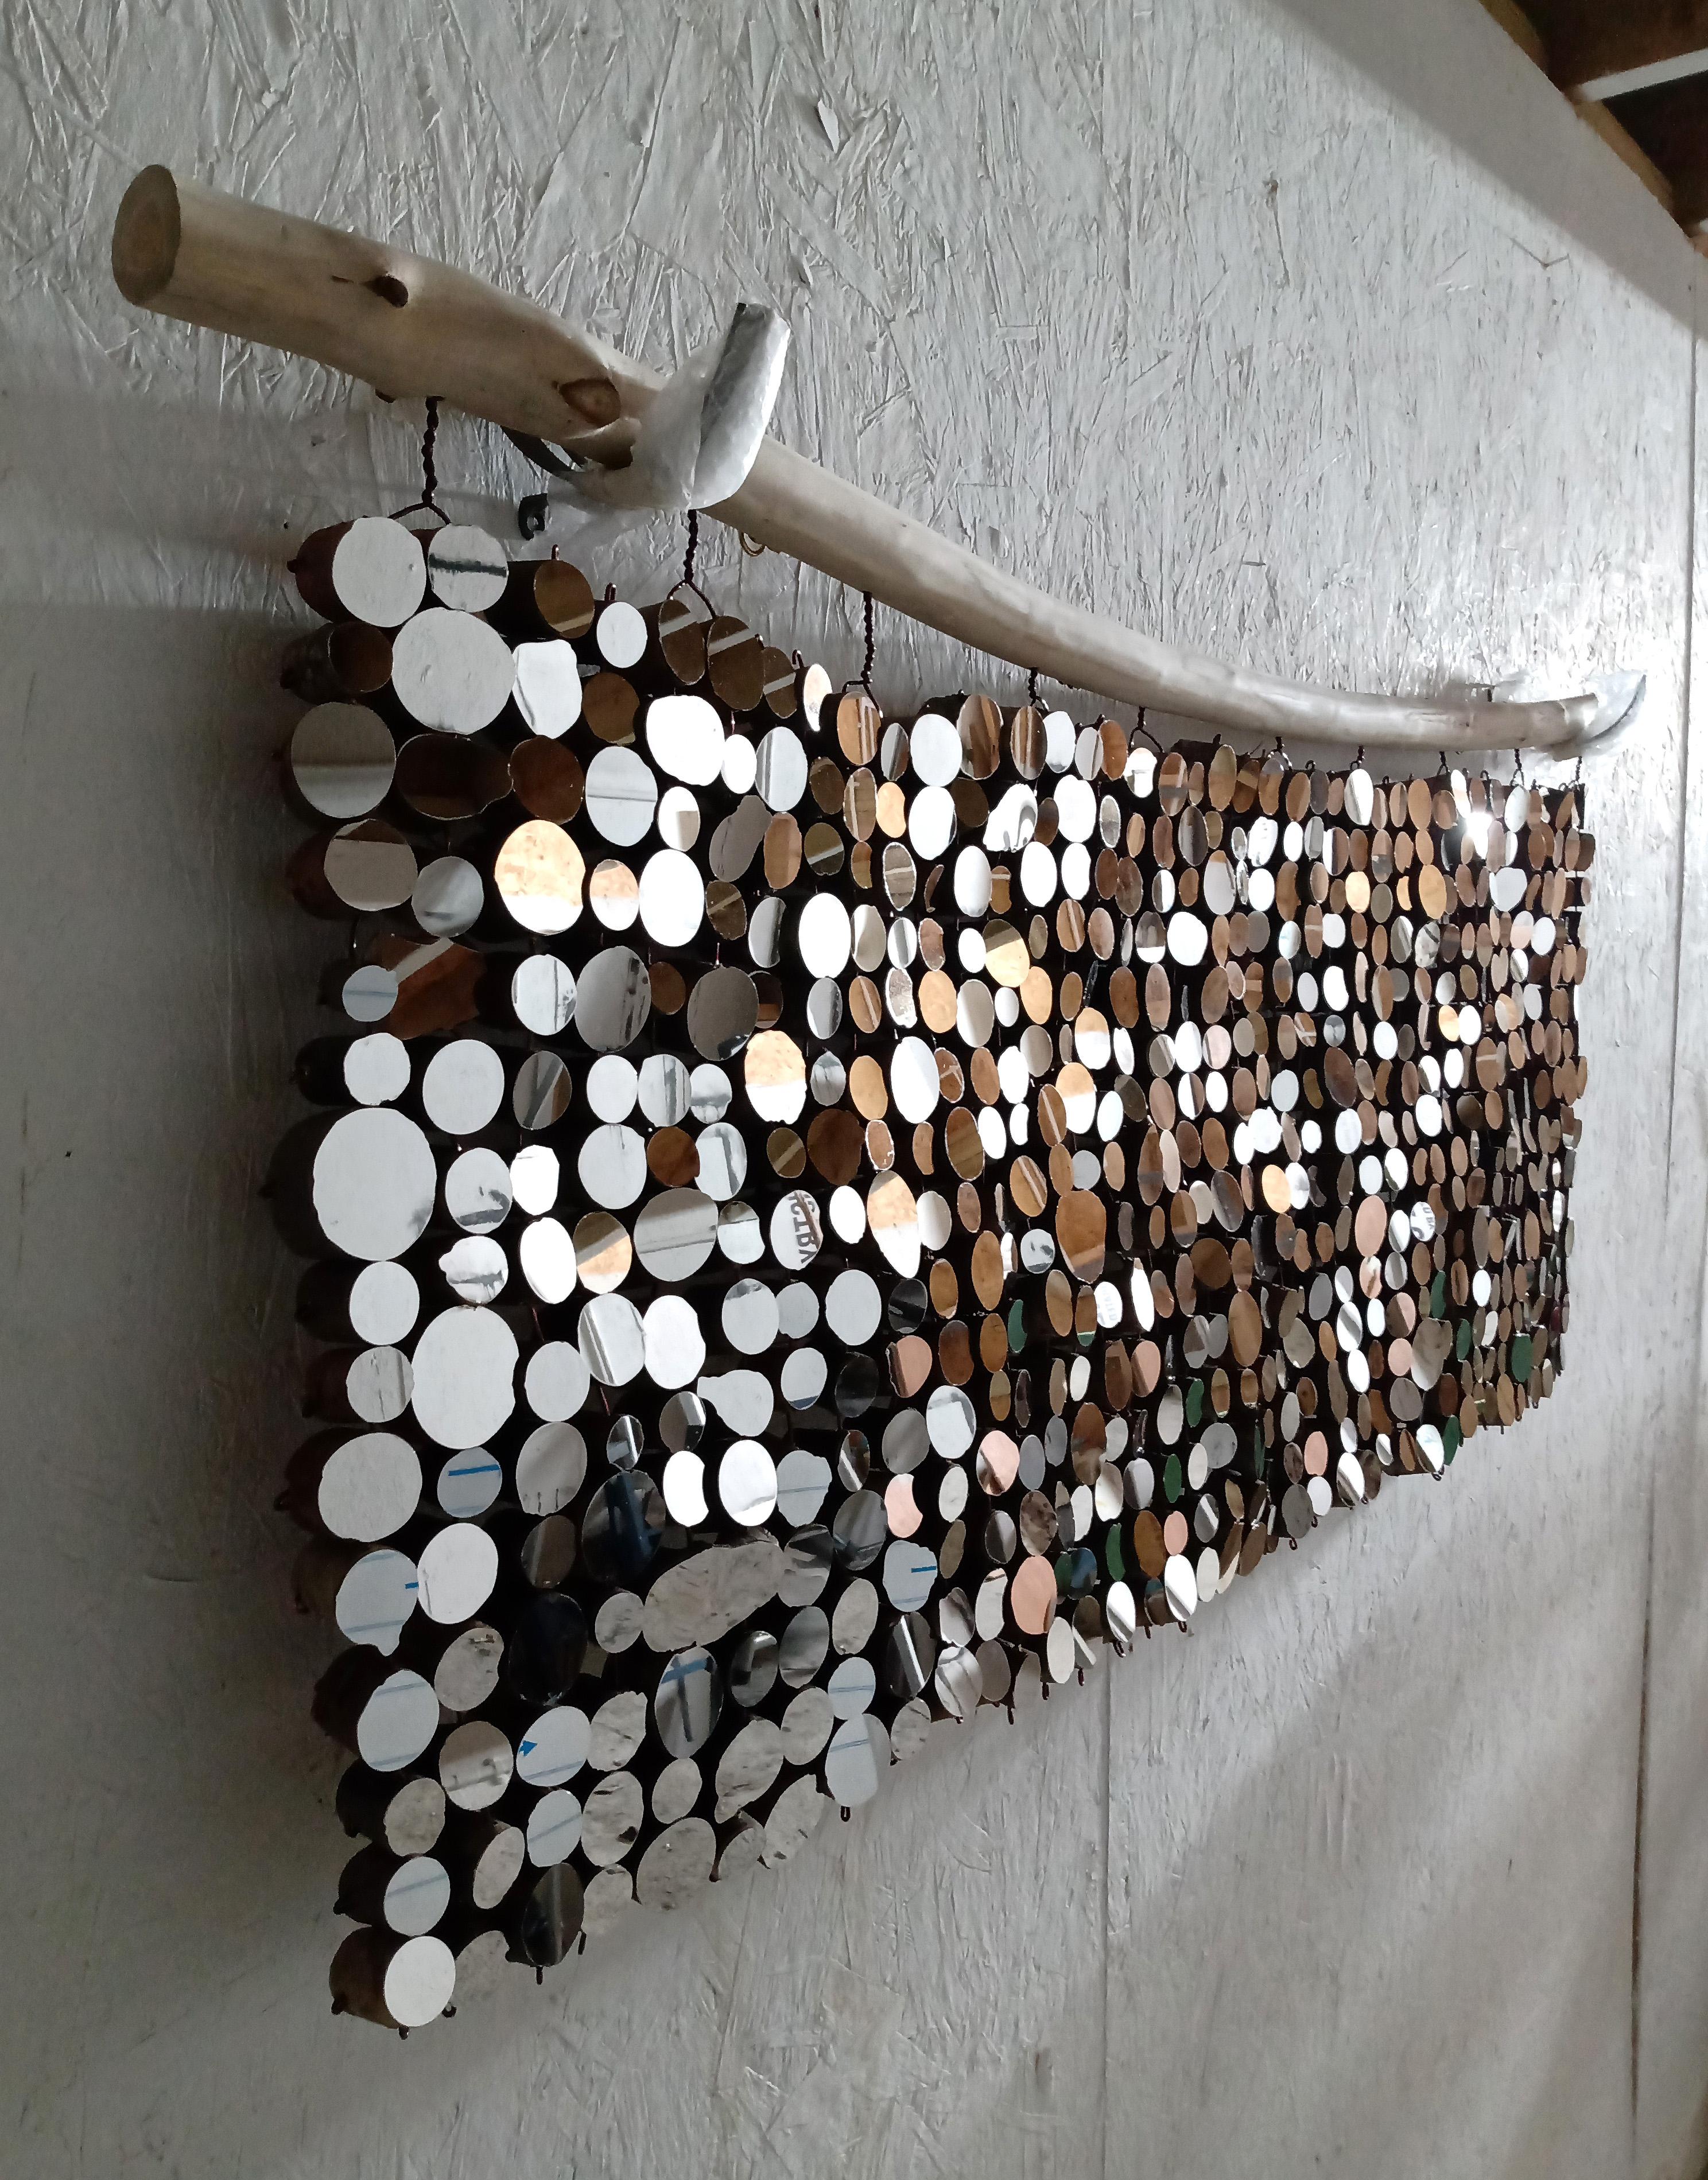 Landscape Mirror Tapestry 2: Sculptural Wall Hanging of Mirrors and Fallen Wood - Contemporary Sculpture by Lee Borthwick